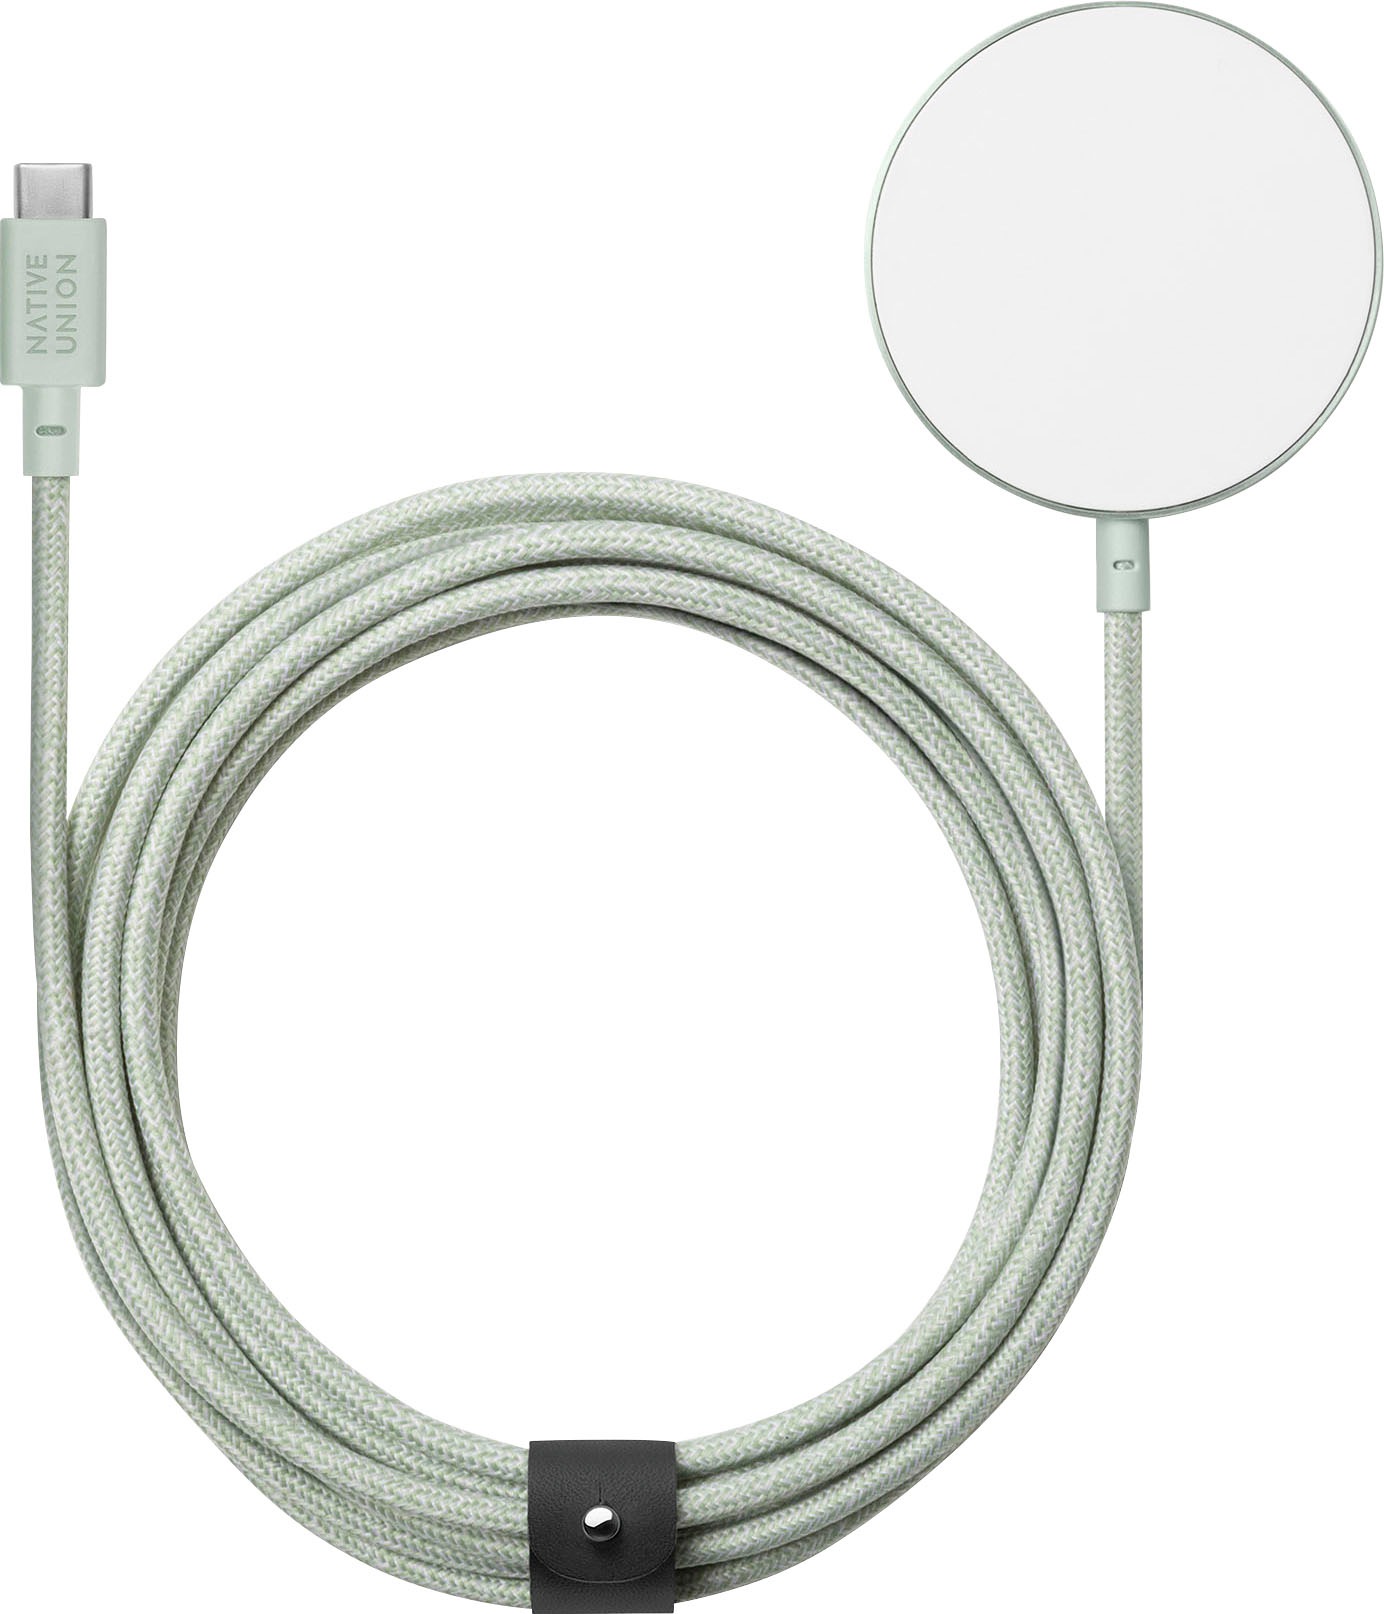 NATIVE UNION Smartphone-Kabel »Snap Cable XL USB-C to MagSafe«, USB-C, 300 cm